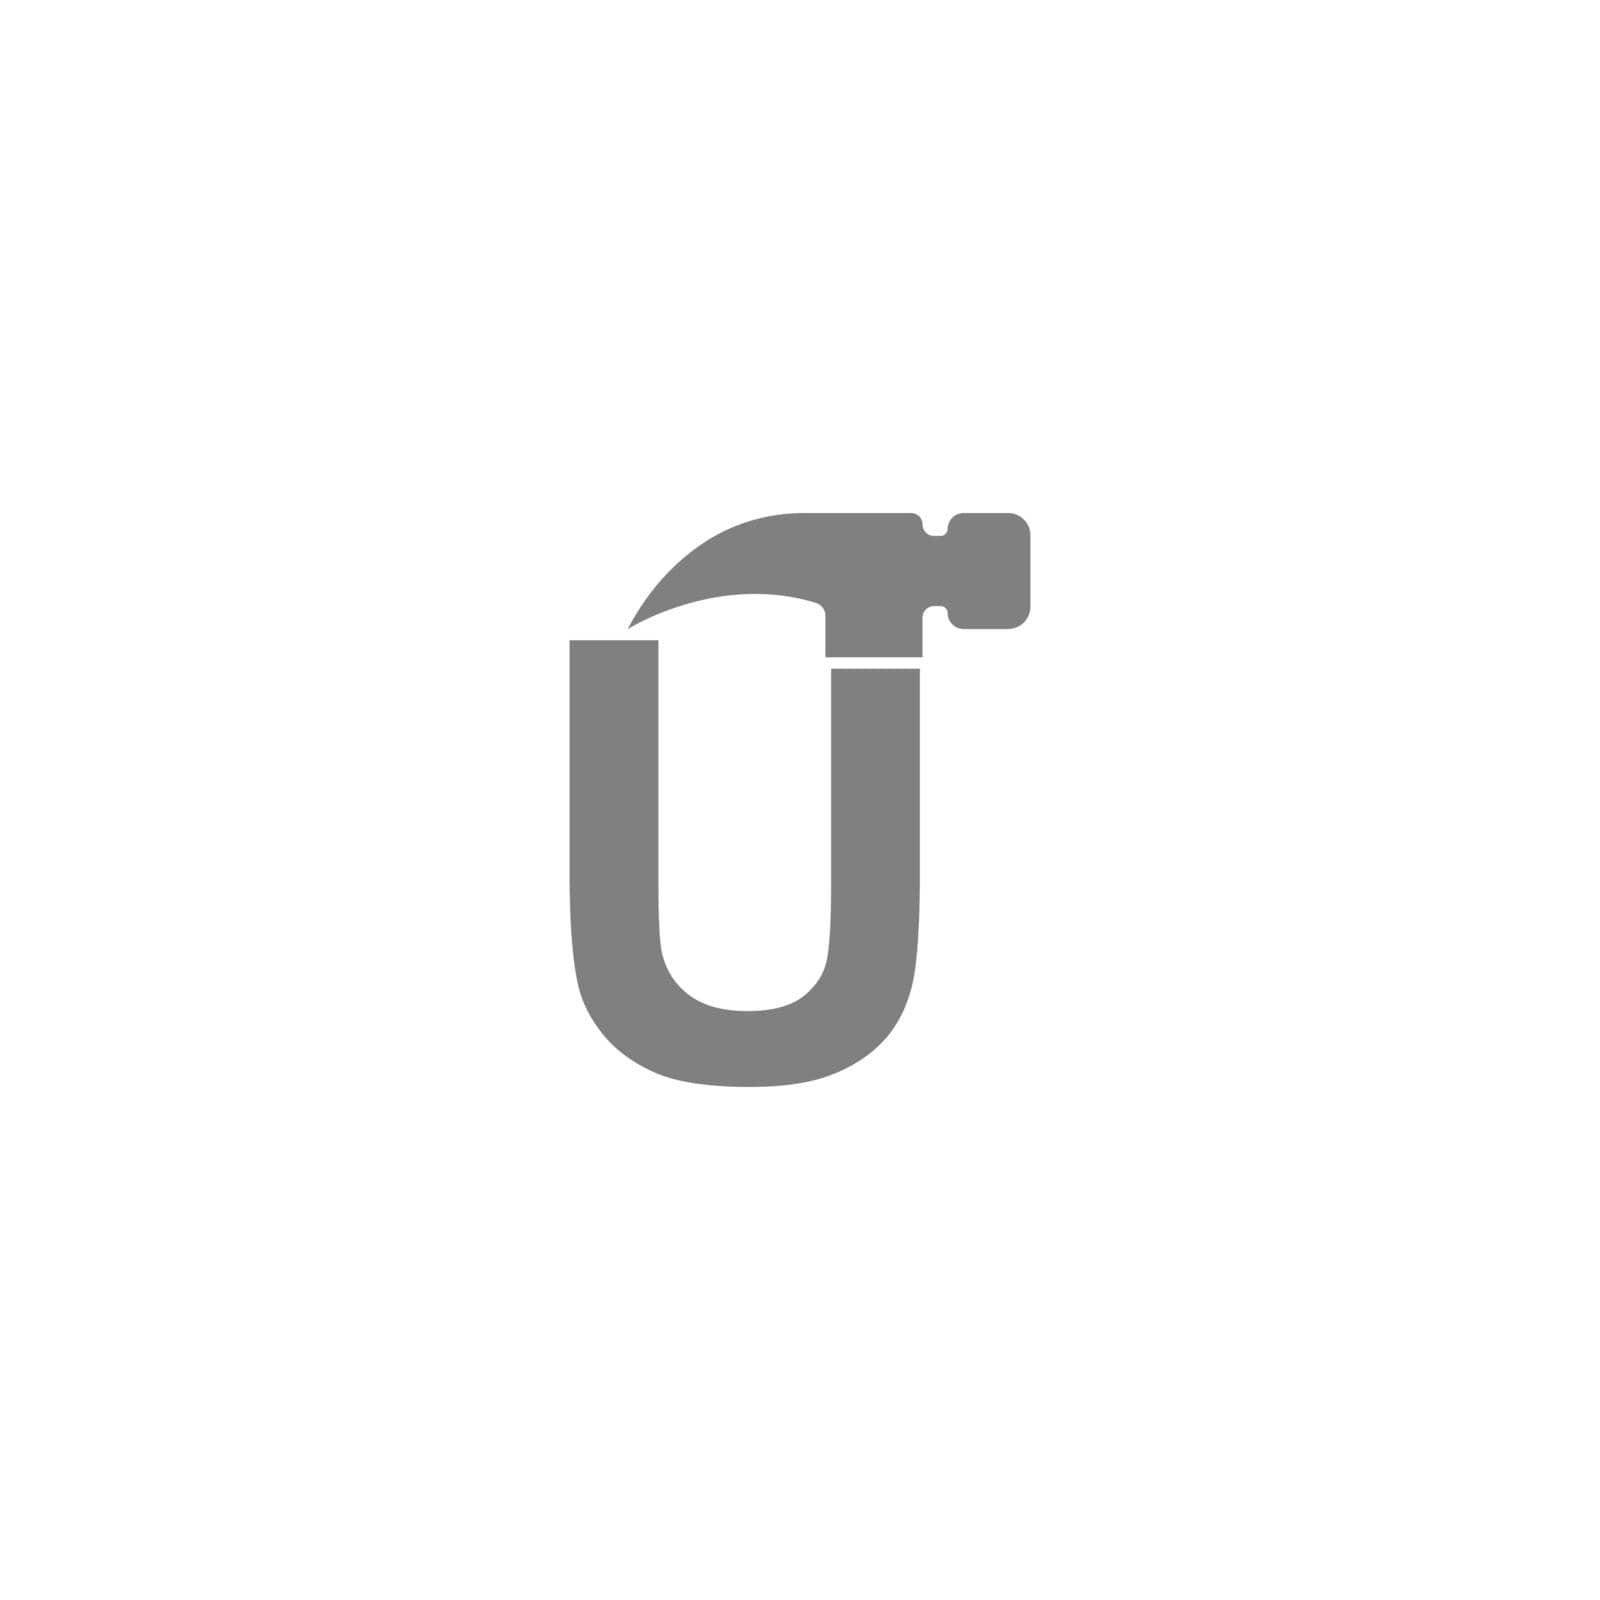 Letter U and hammer combination icon logo design by bellaxbudhong3